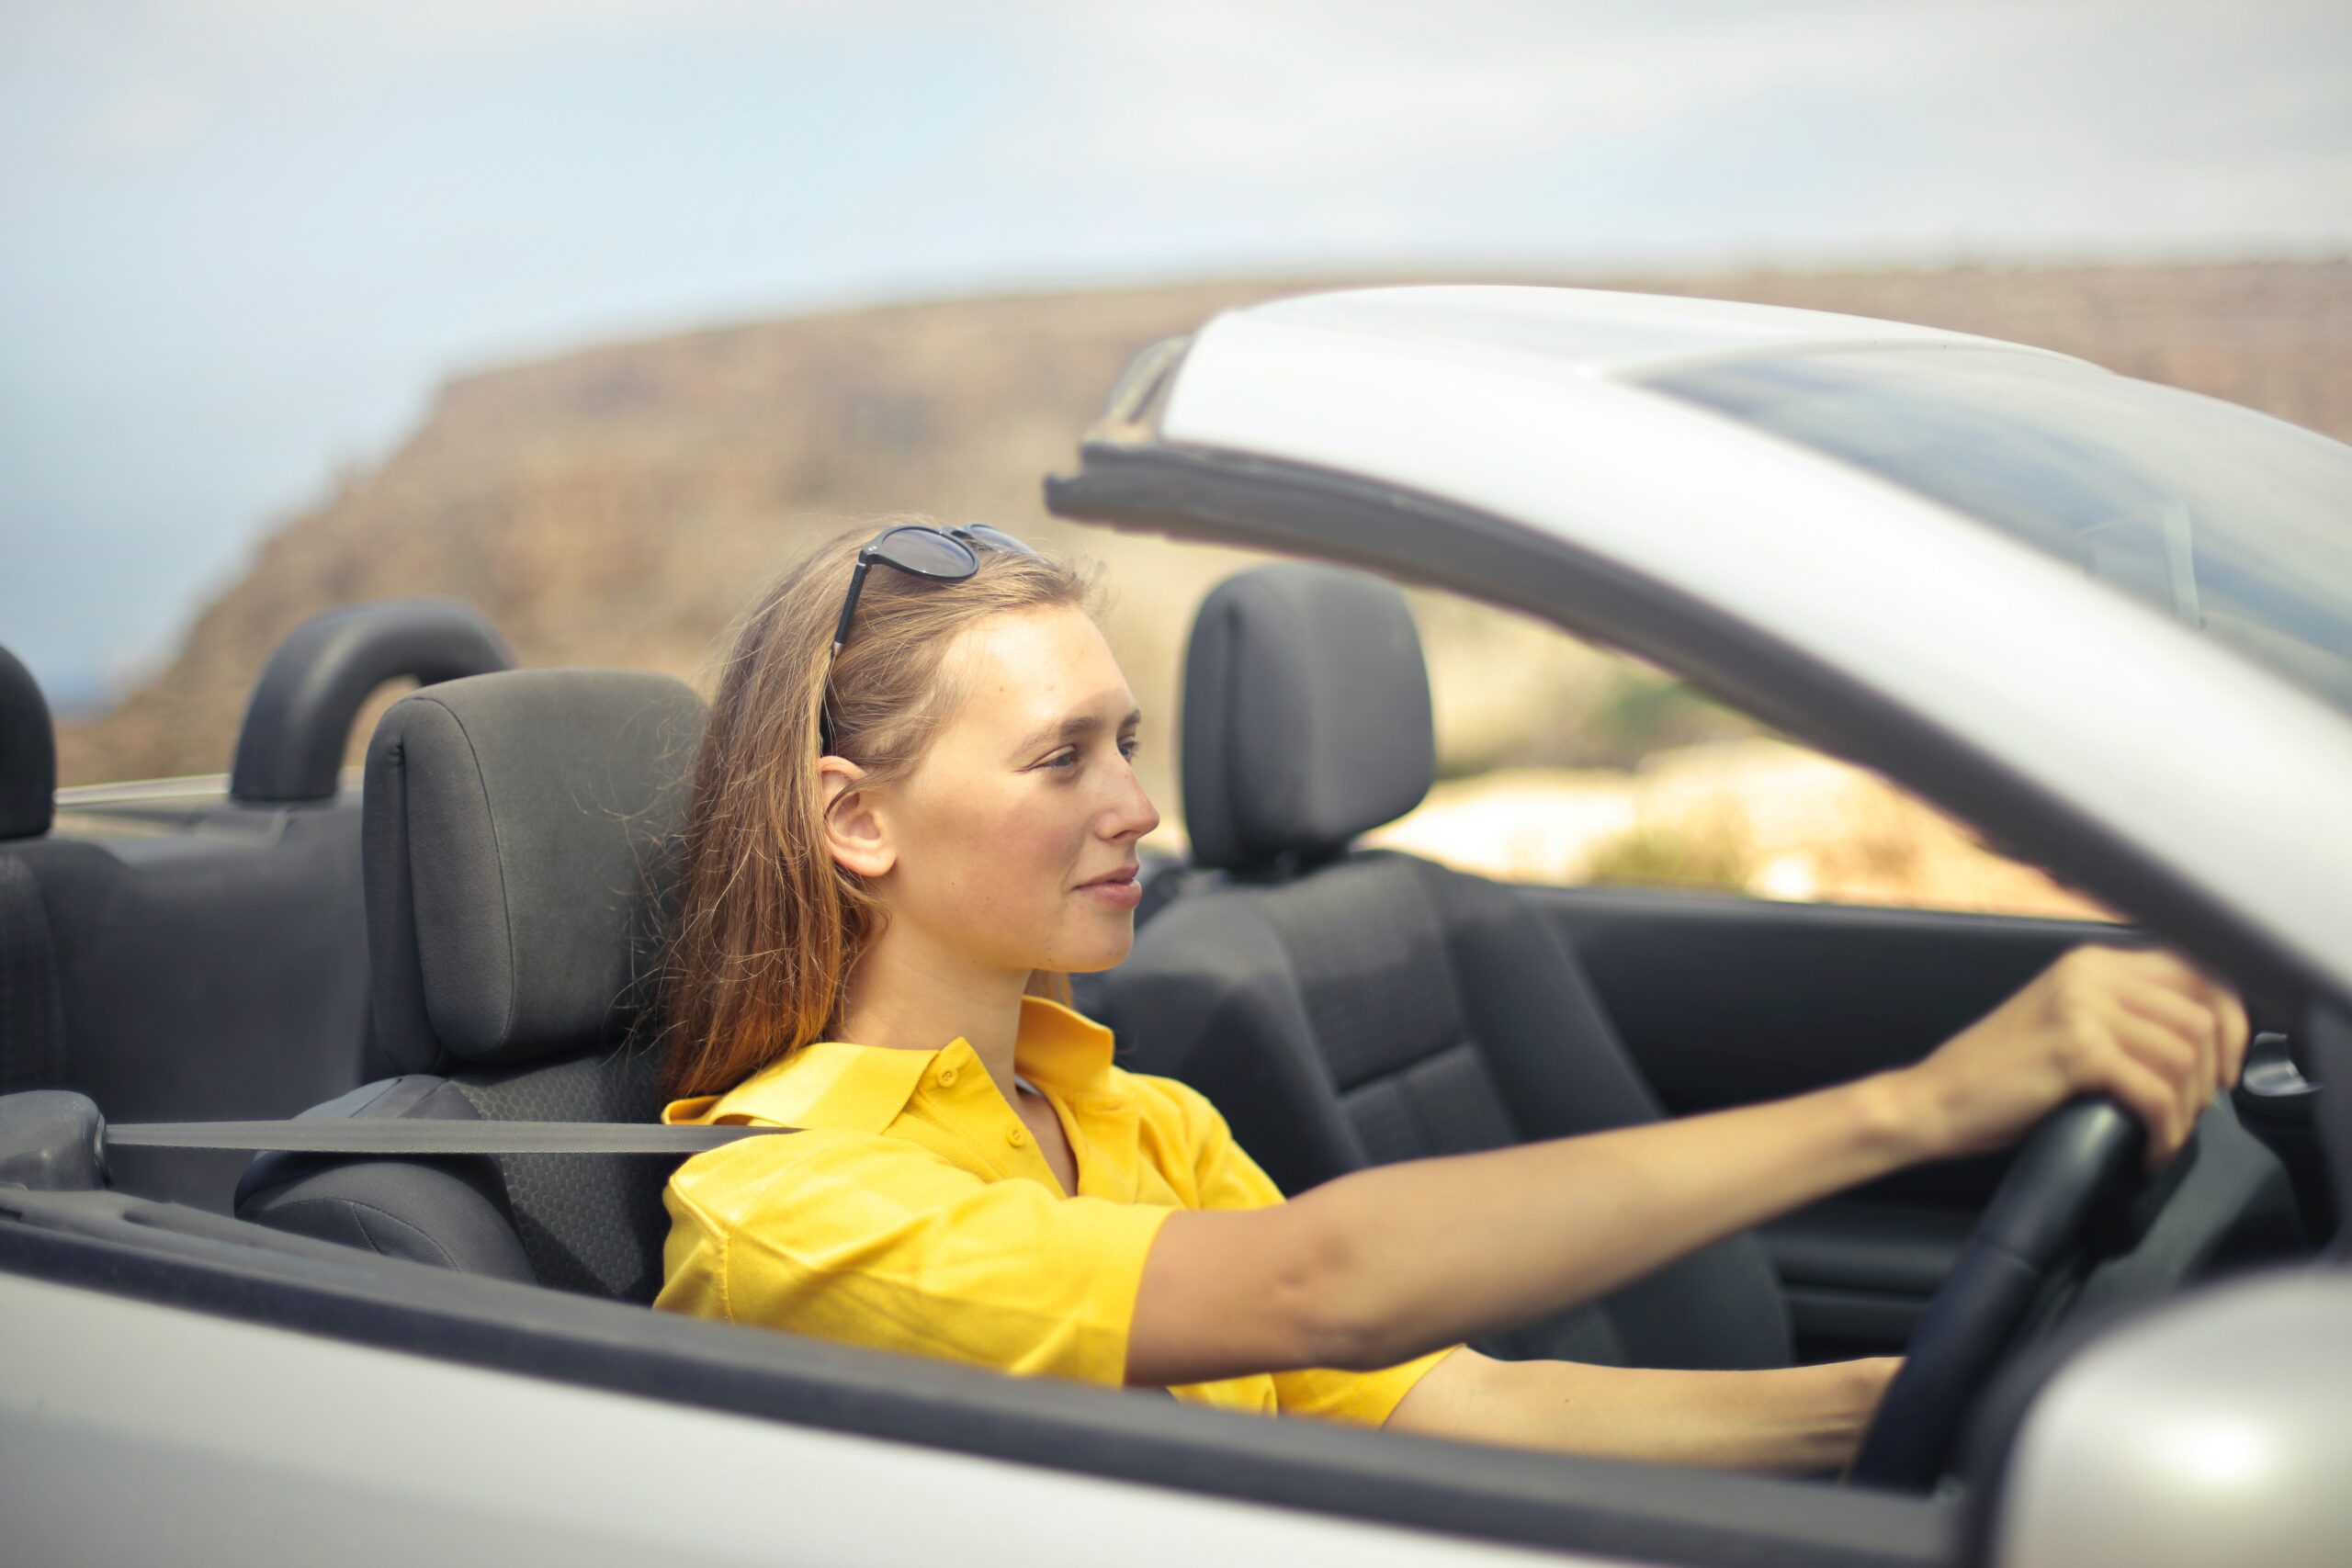 Cheap Car Insurance for Ladies: Finding Affordable Coverage